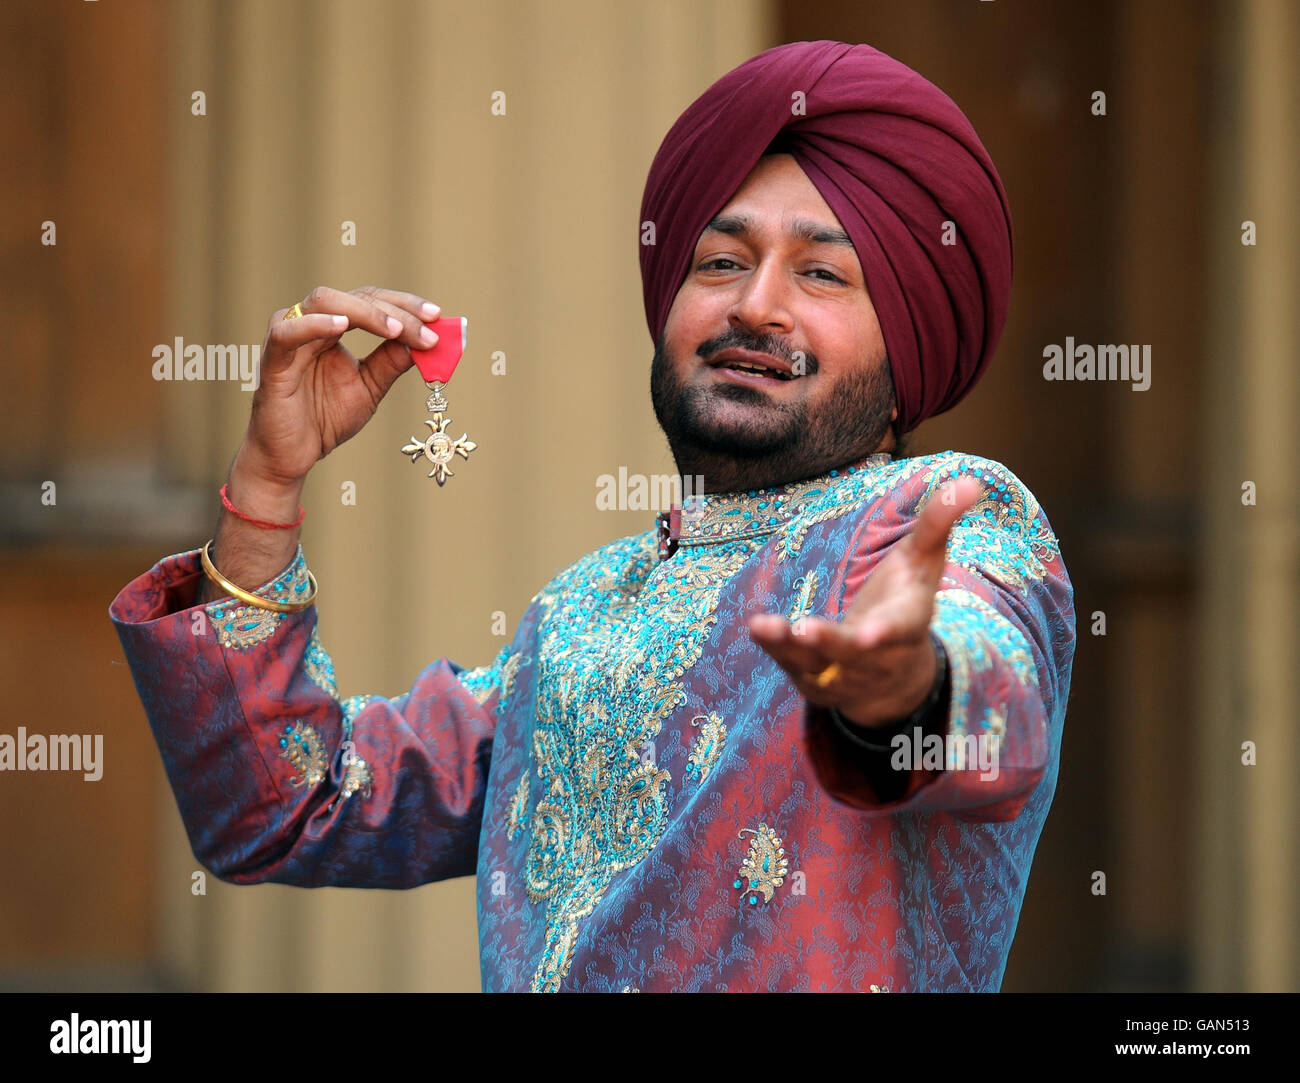 Malkit Singh, 48, a renowned Bangra singer from Sutton Coldfield, West Midlands after he collected an MBE from Queen Elizabeth II during an investiture ceremony at Buckingham Palace, London. Stock Photo